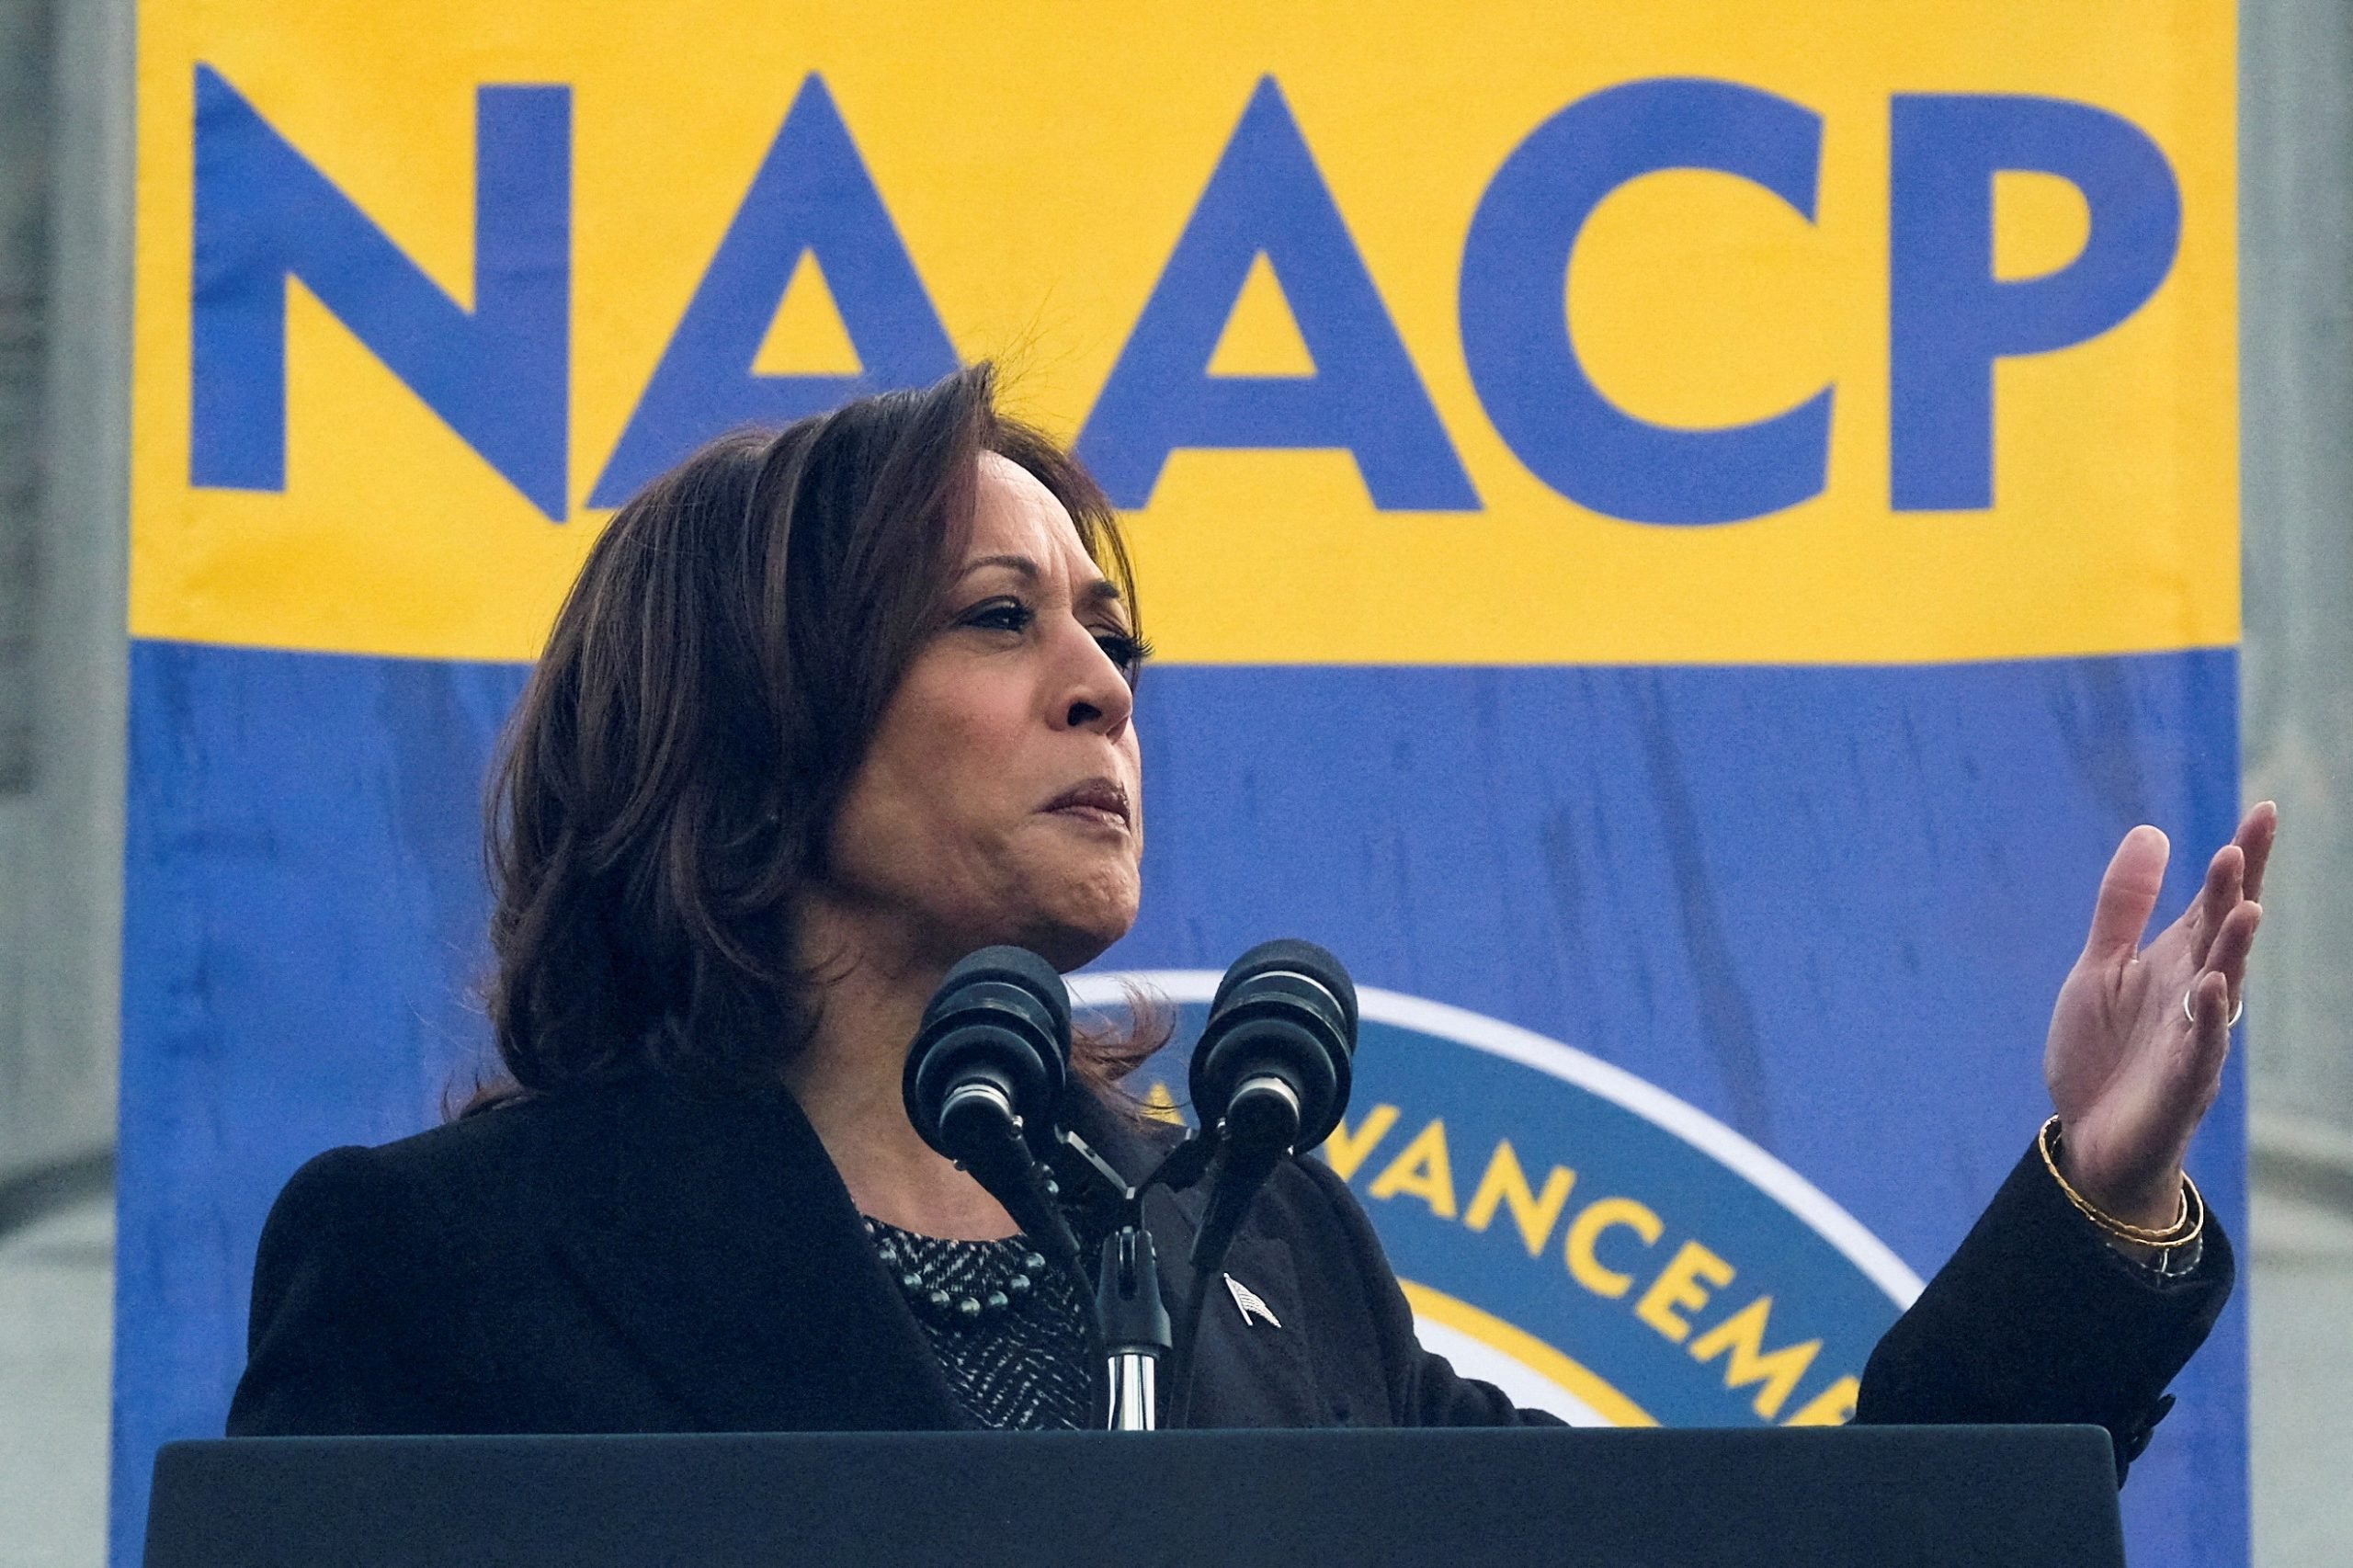 ‘We will fight,’ Harris says in MLK Day speech, warning of threats to US freedom